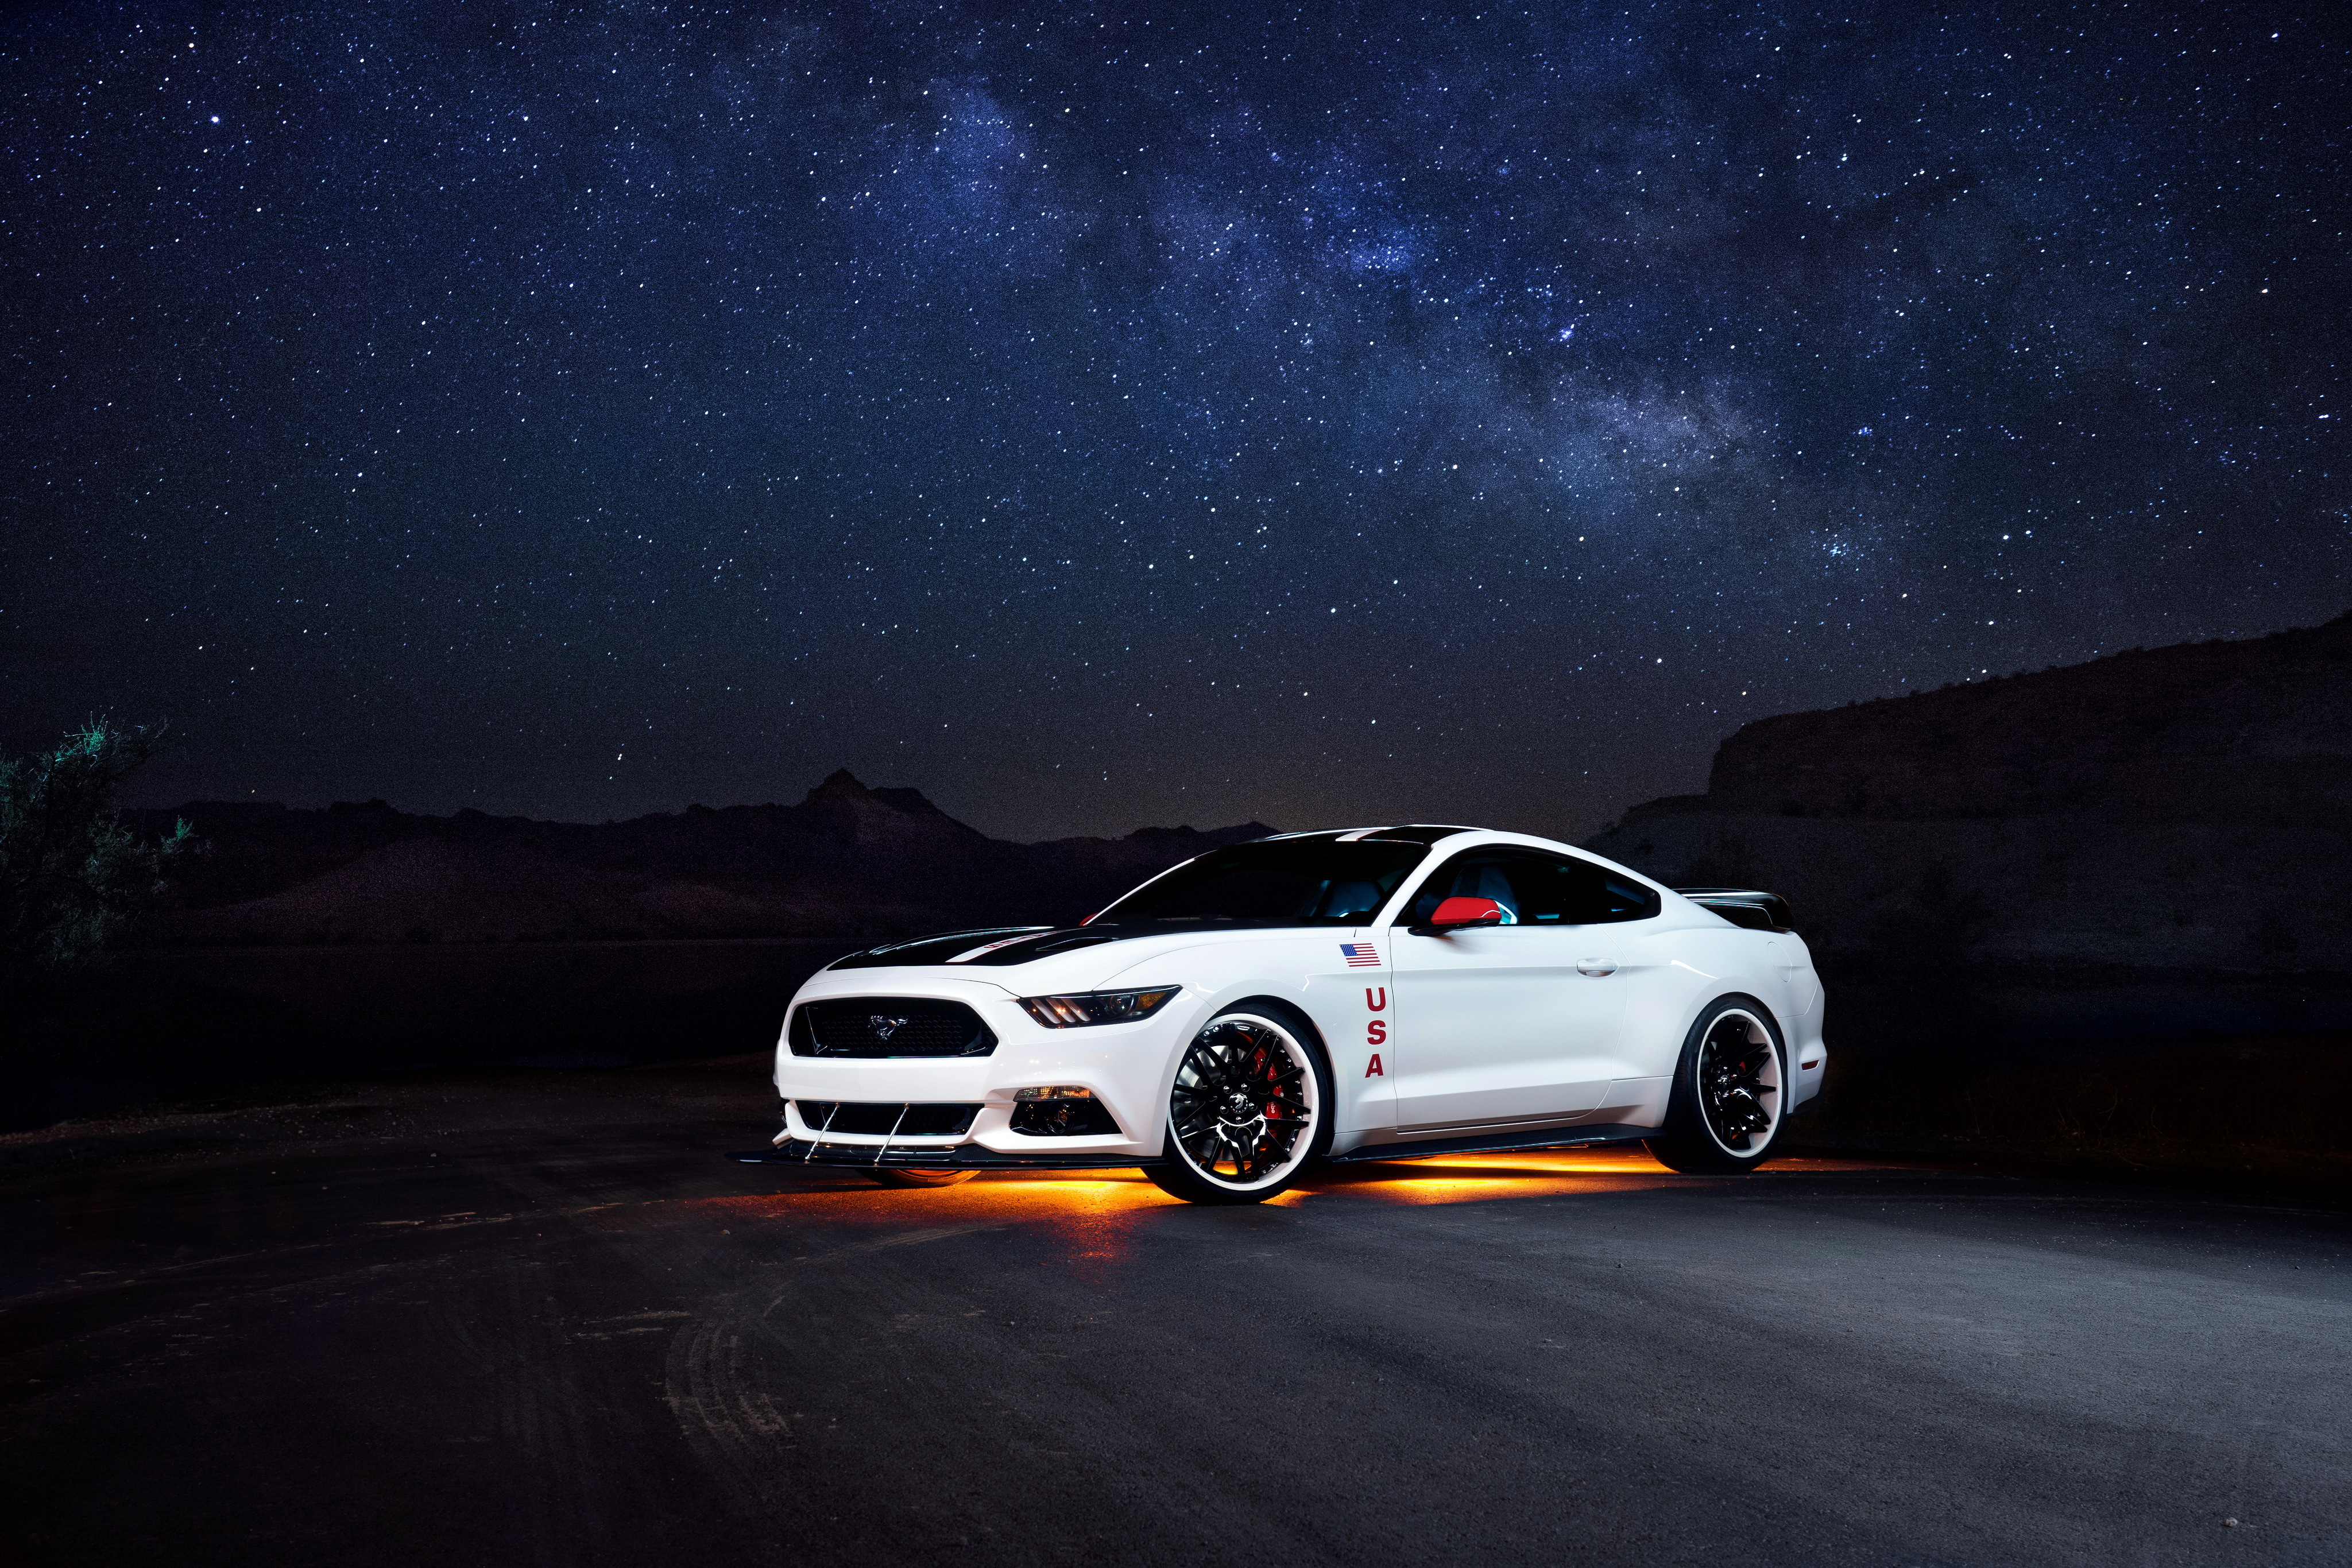 135873 download wallpaper cars, ford, white, night, mustang, side view screensavers and pictures for free